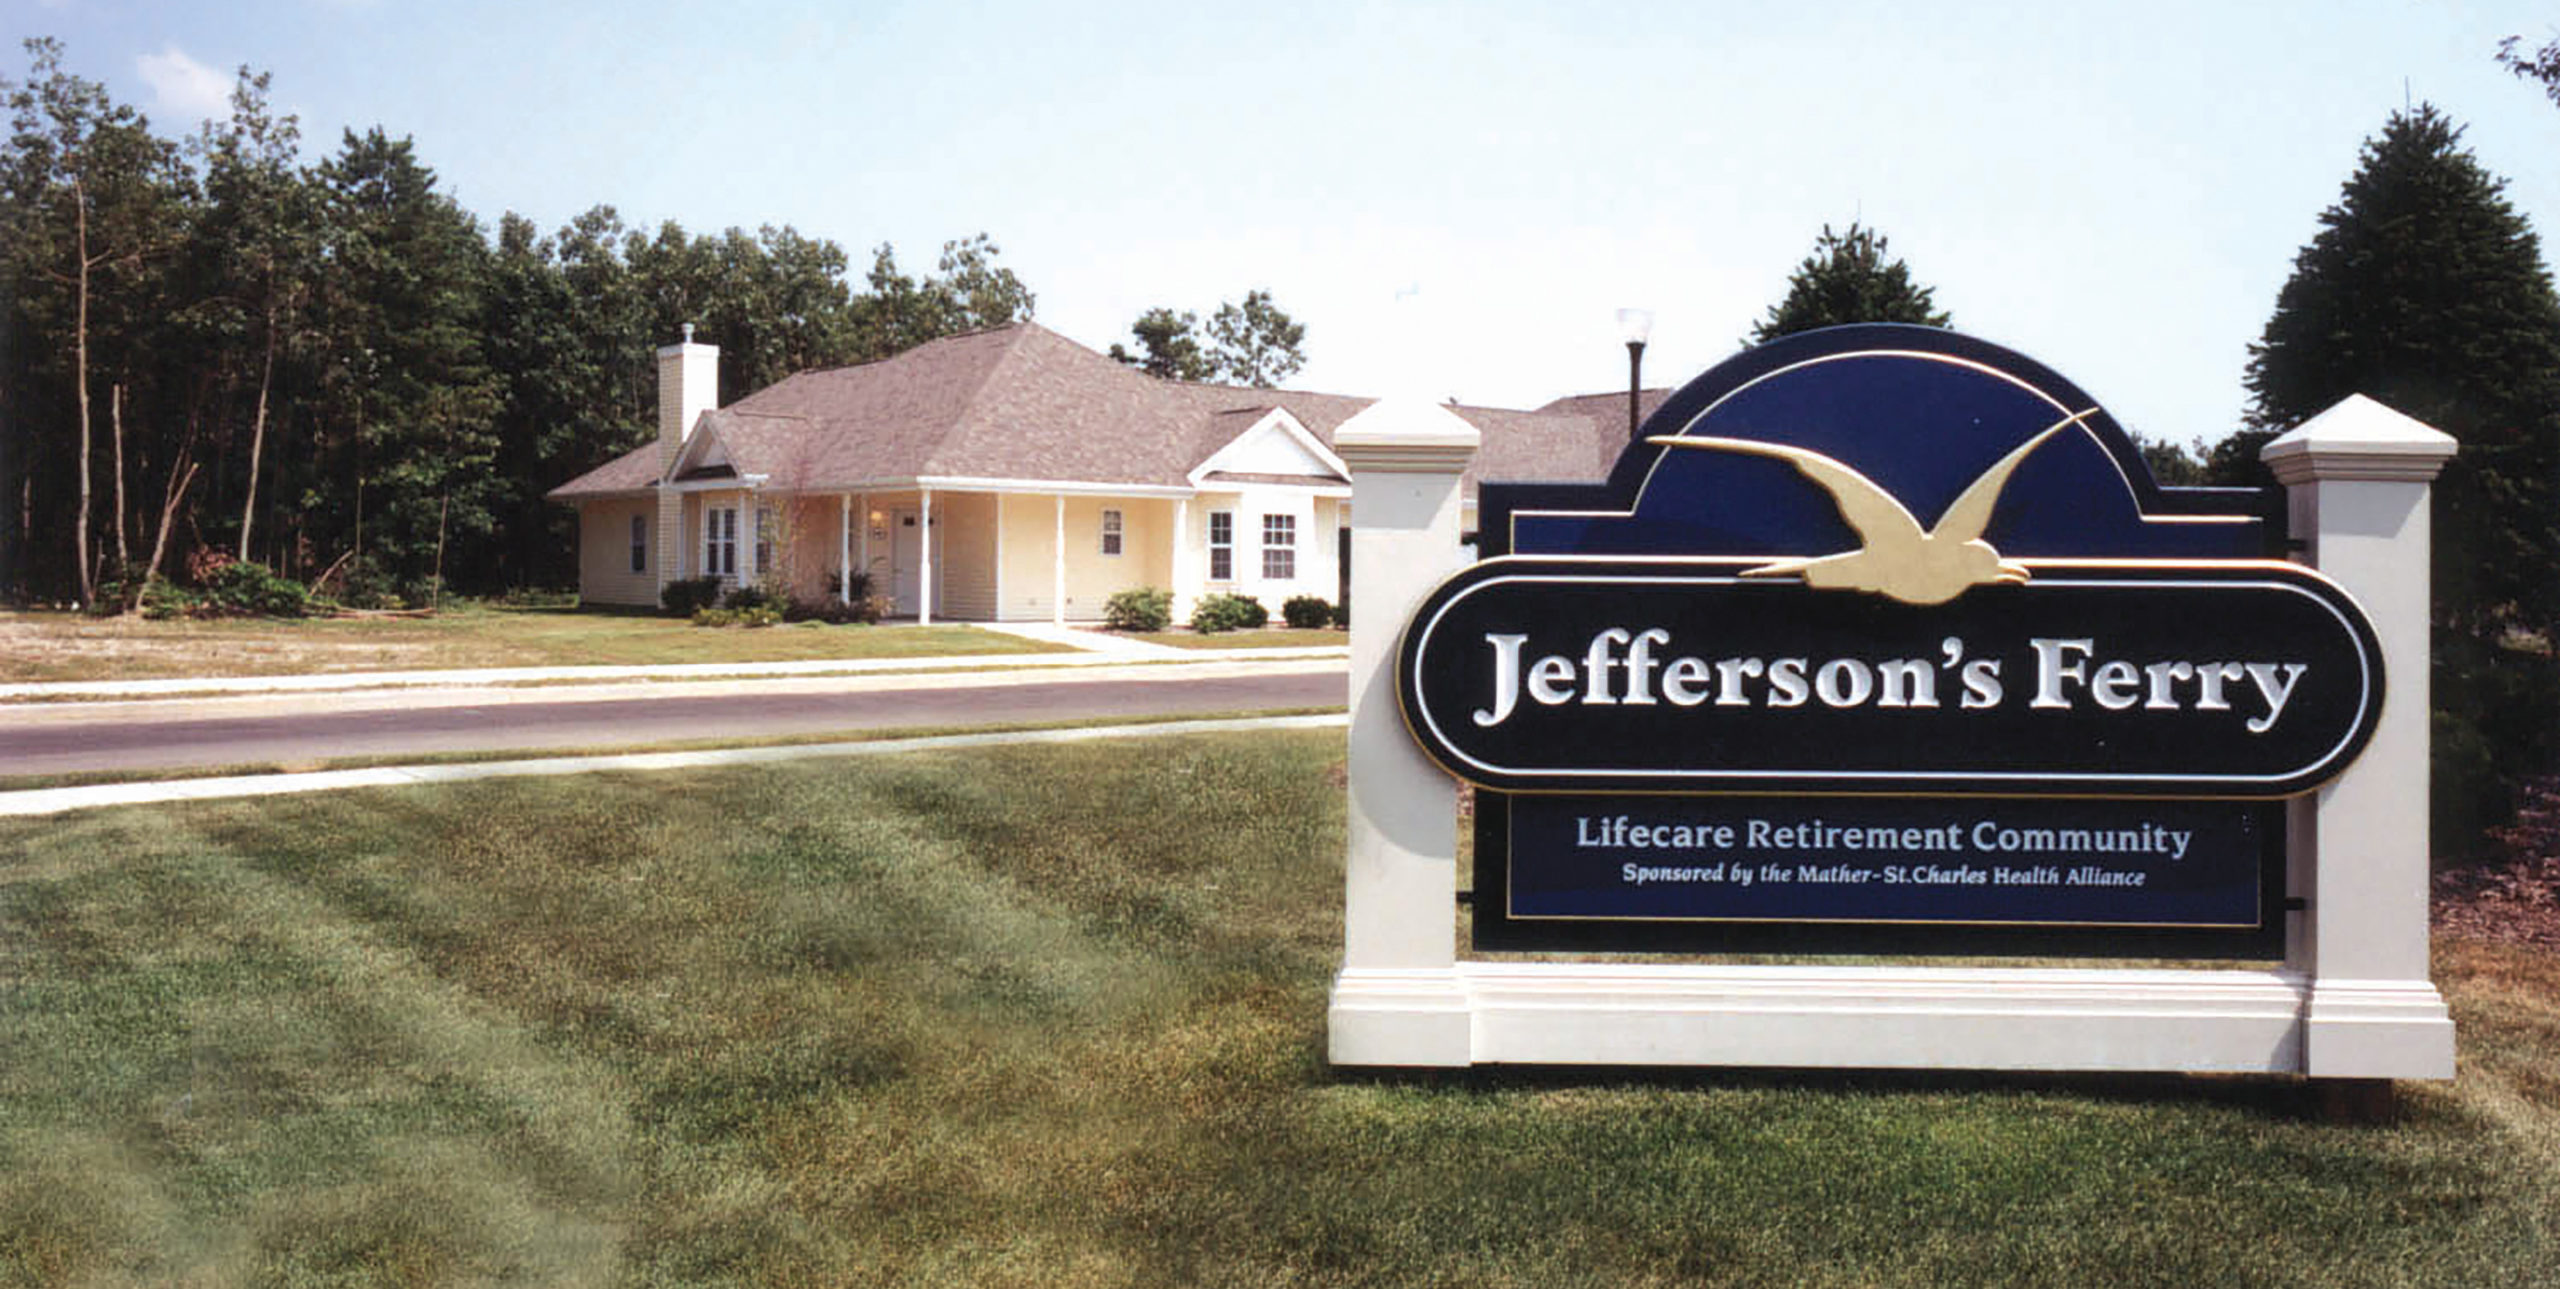 Exterior sign at Jefferson's Ferry in South Setauket